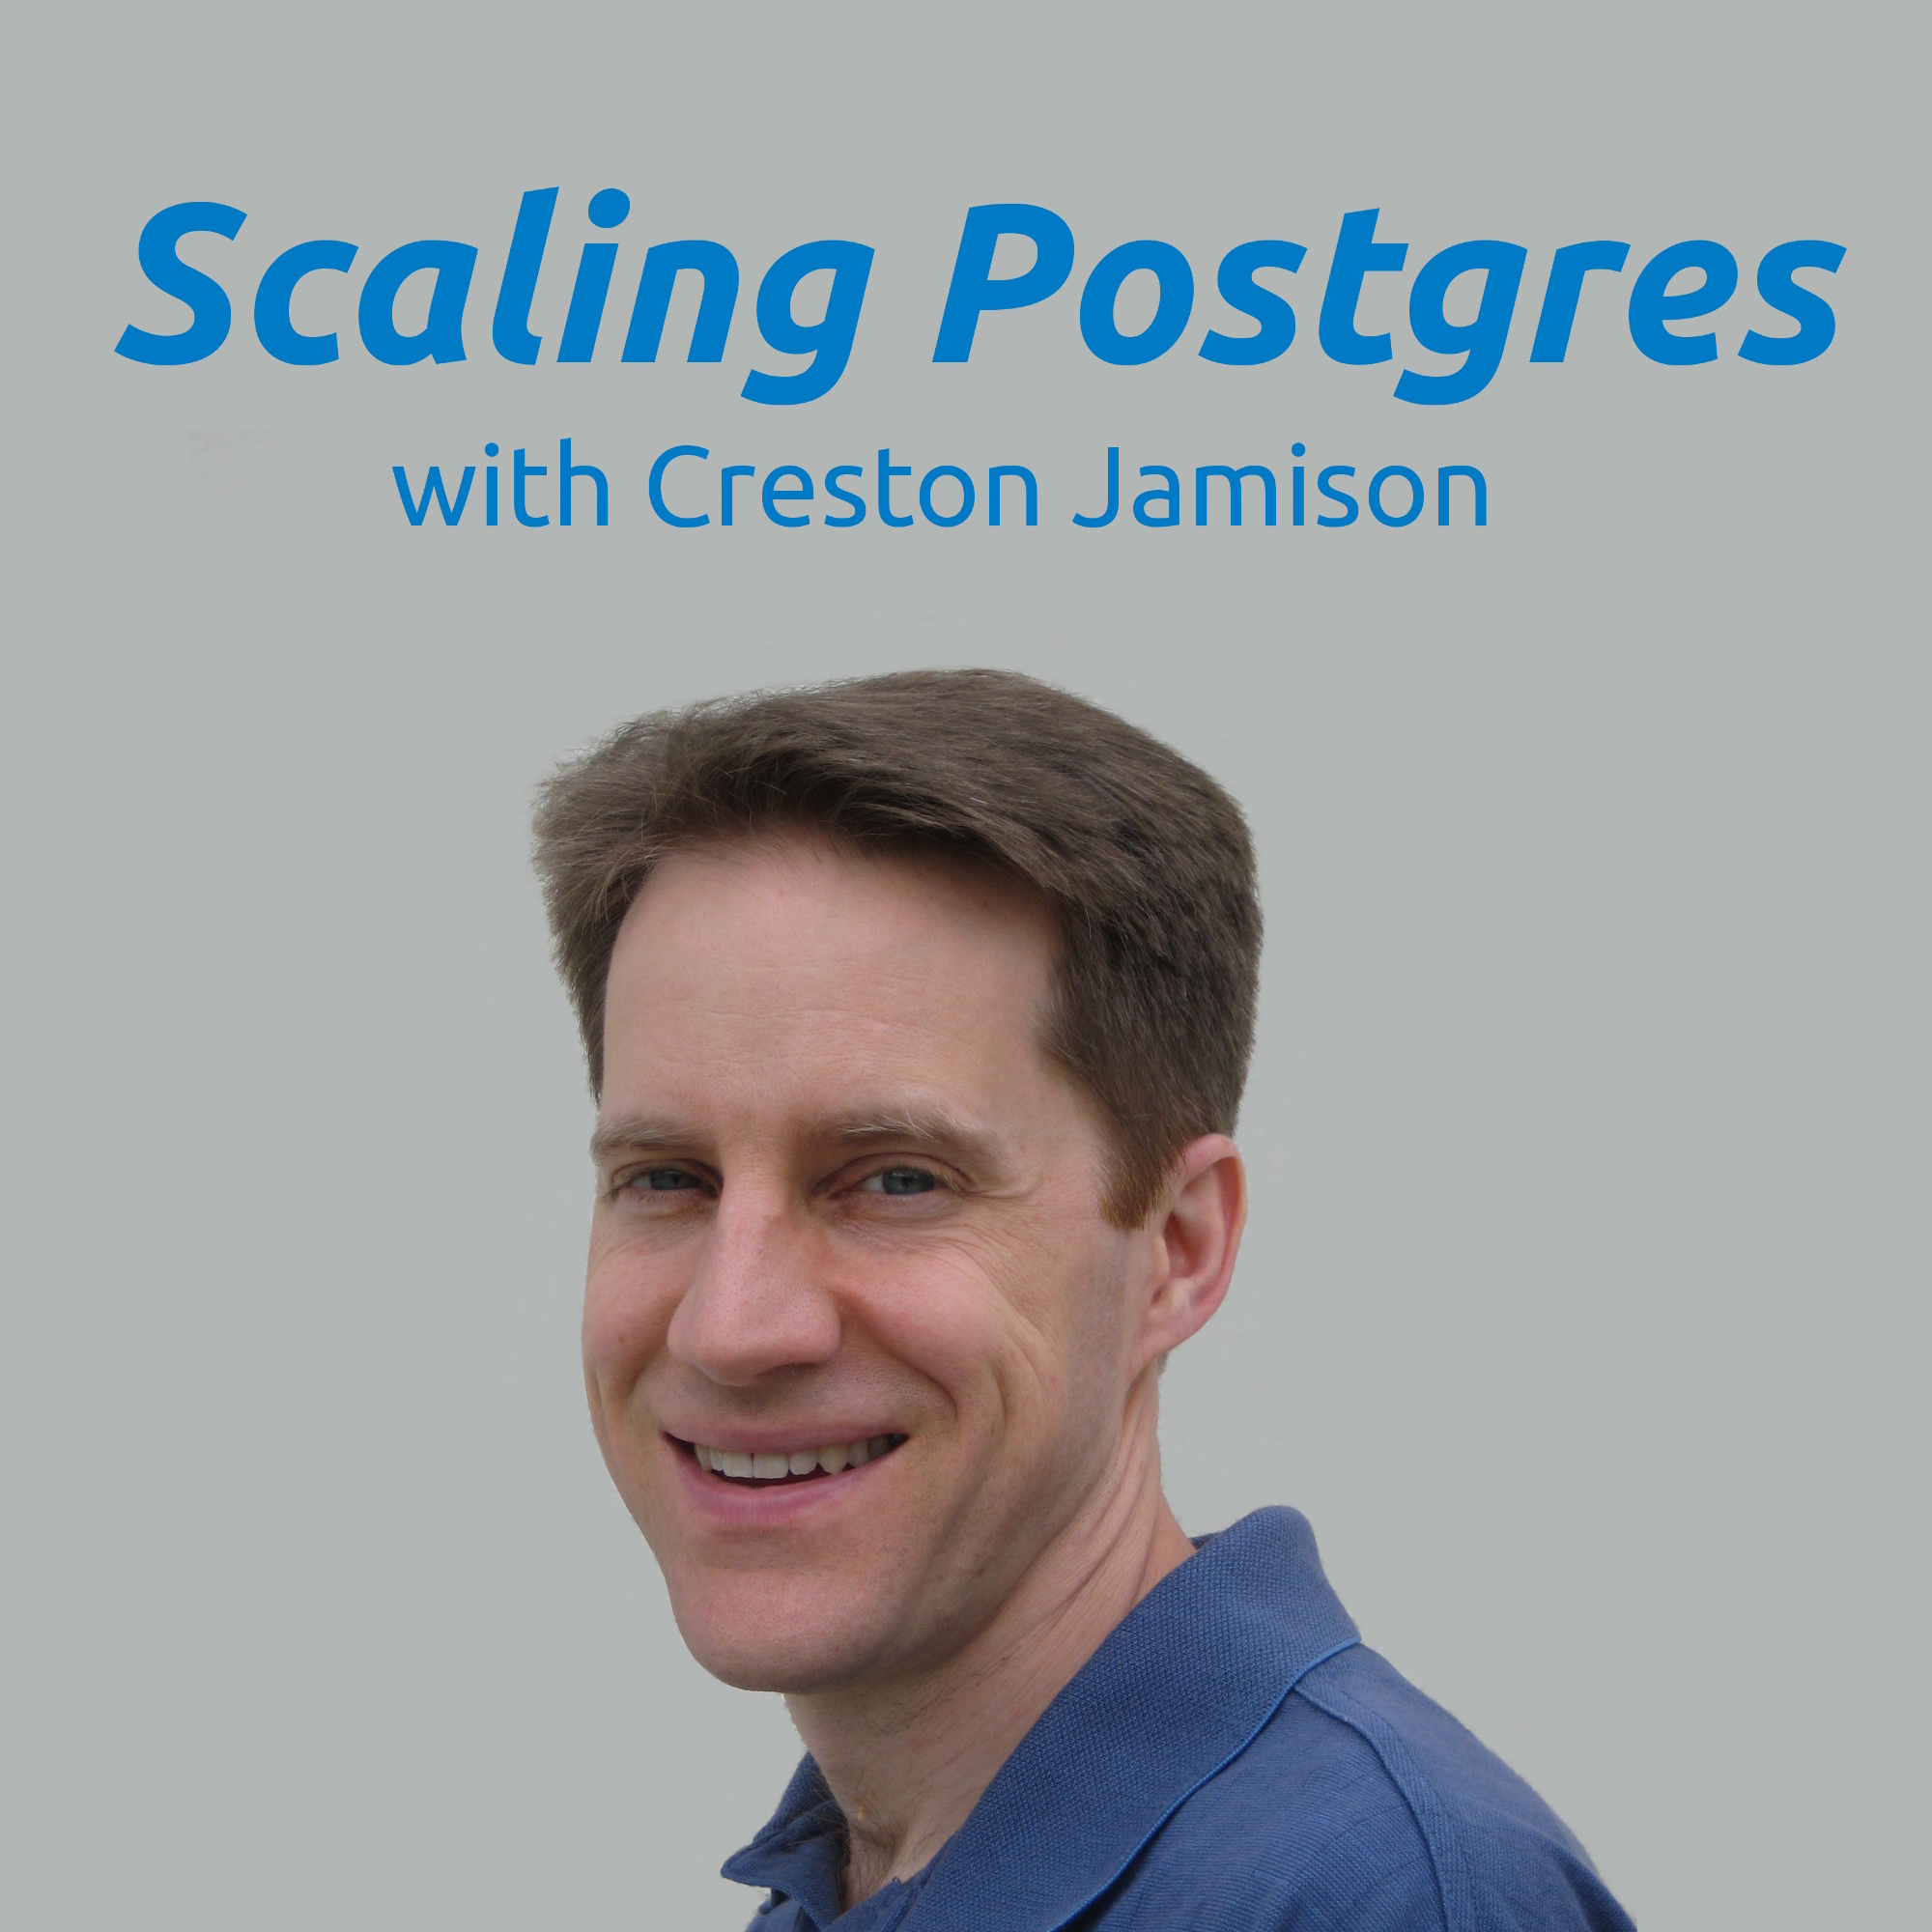 Scaling Out, Planner Estimation, Create Statistics, Stay Curious | Scaling Postgres 103